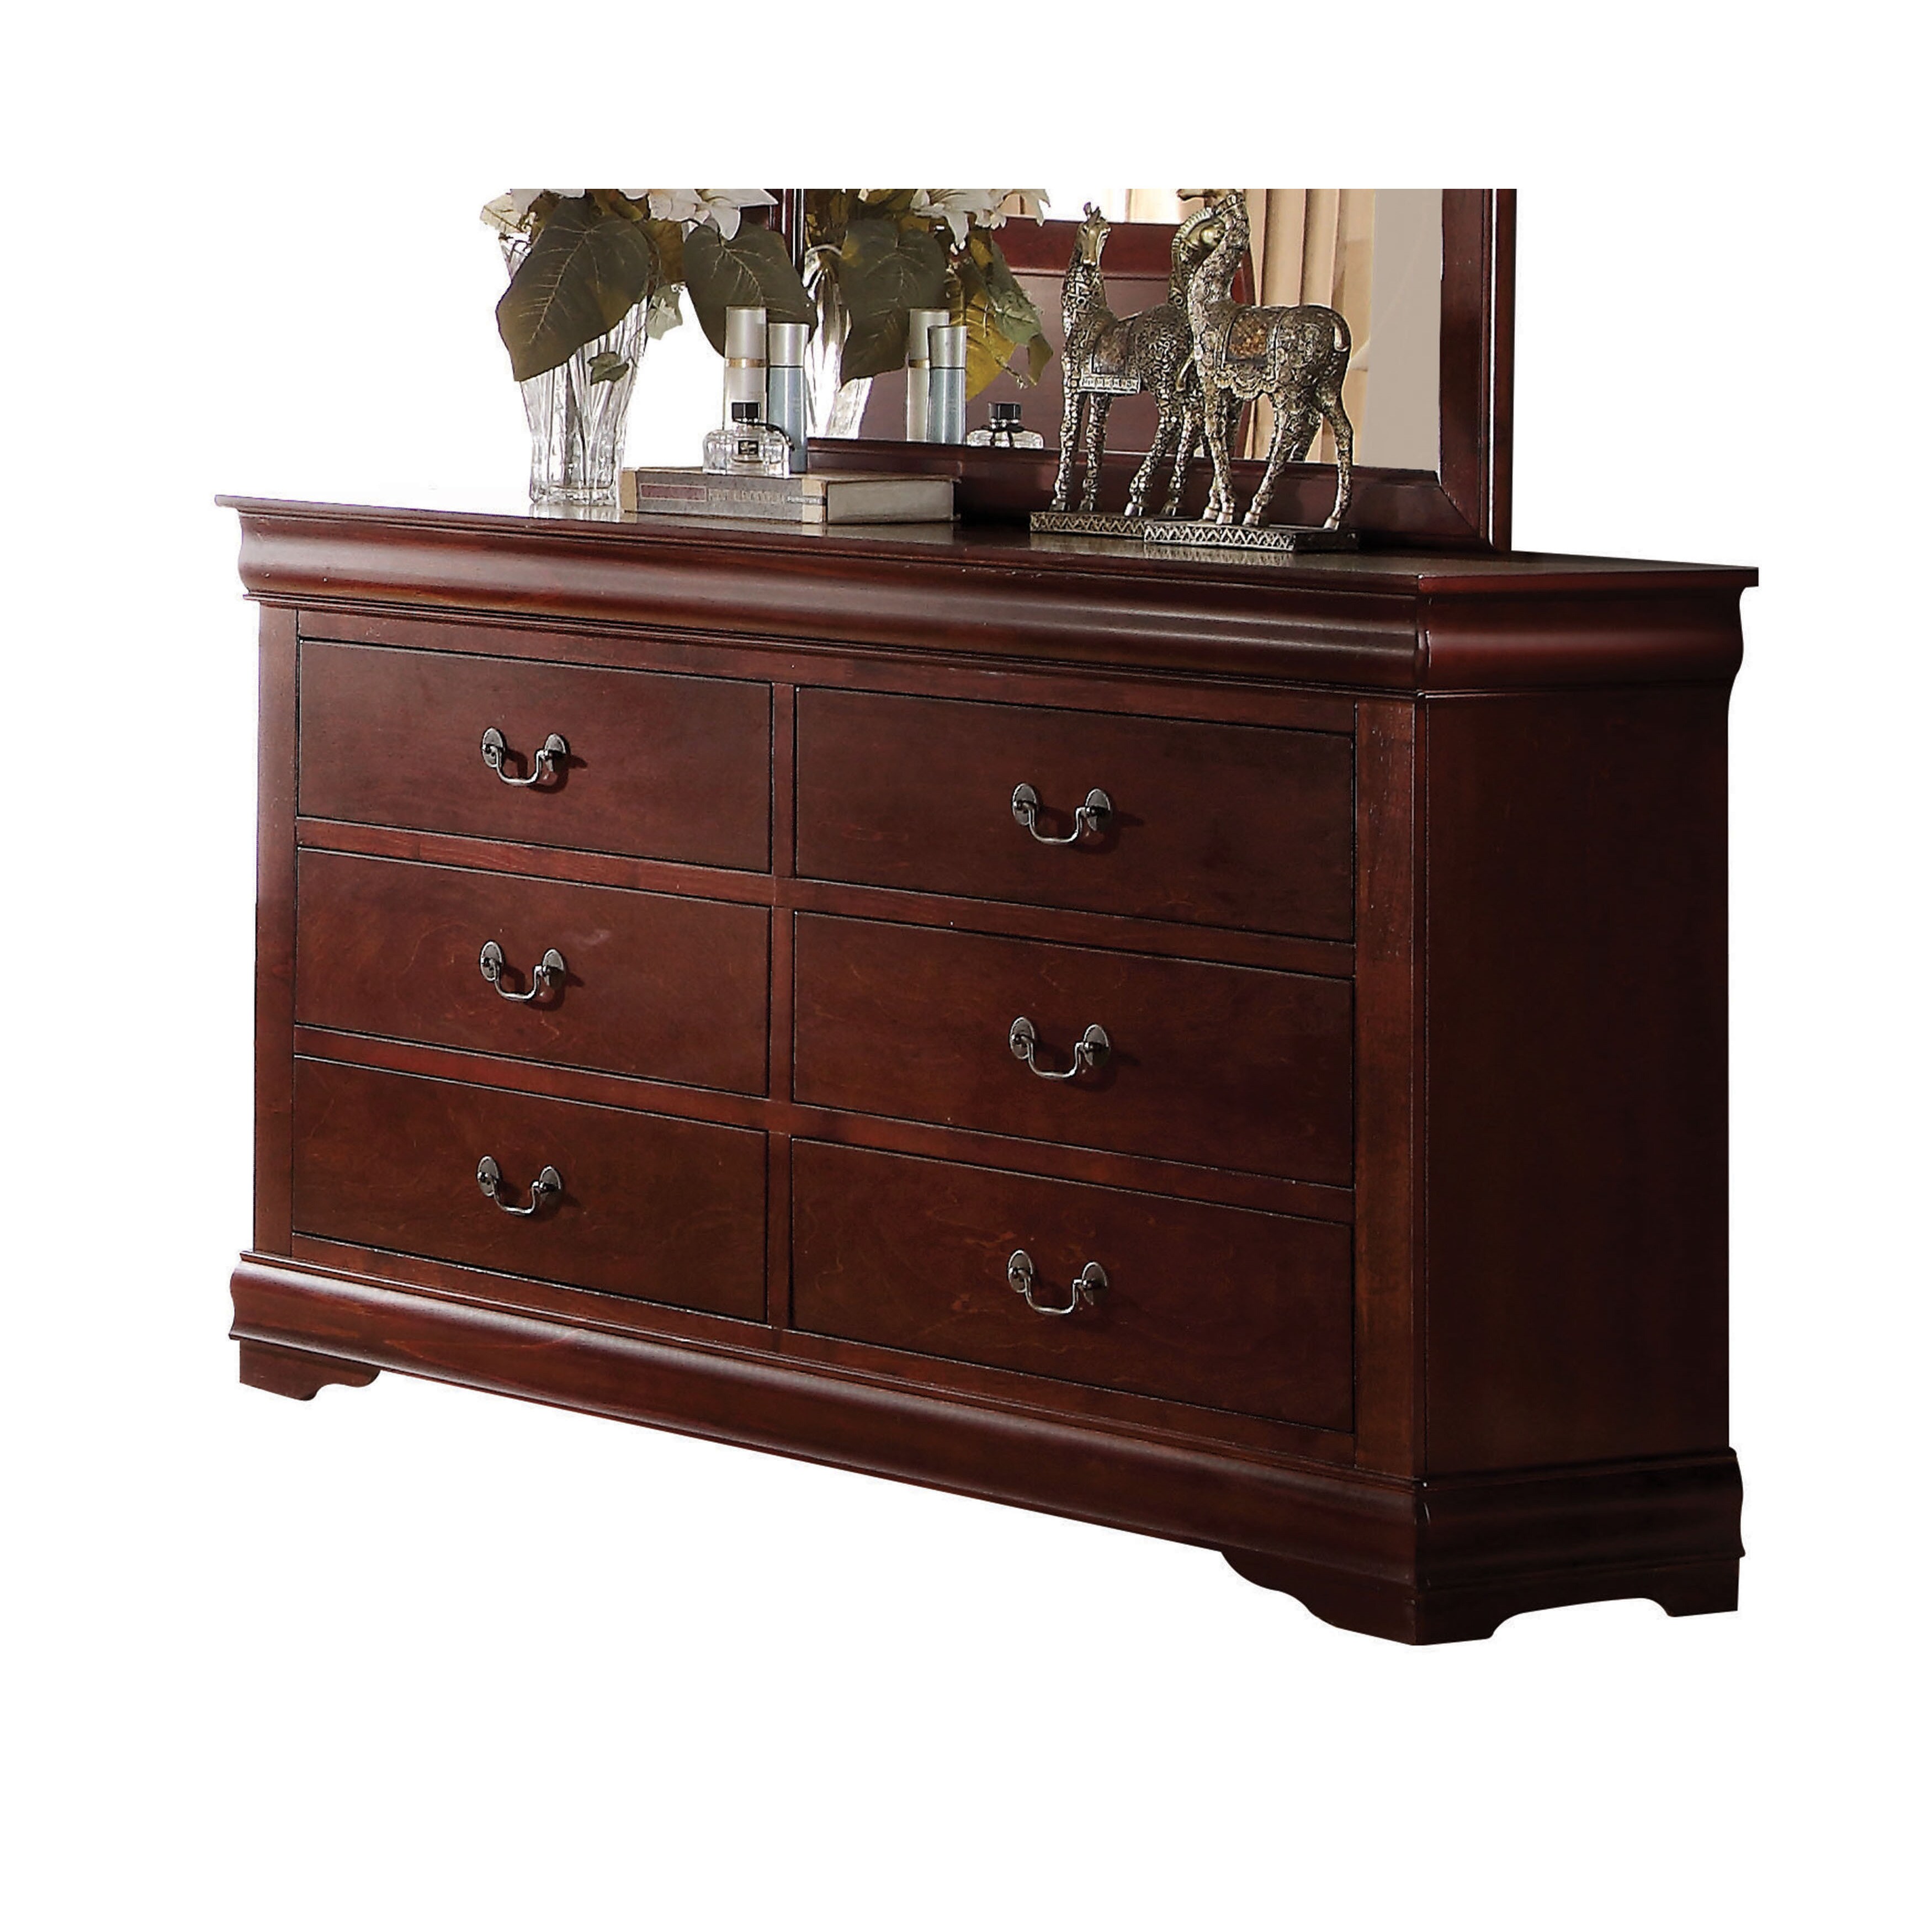 Louis Philippe Youth Sleigh Bedroom Set (Cherry) by Acme Furniture